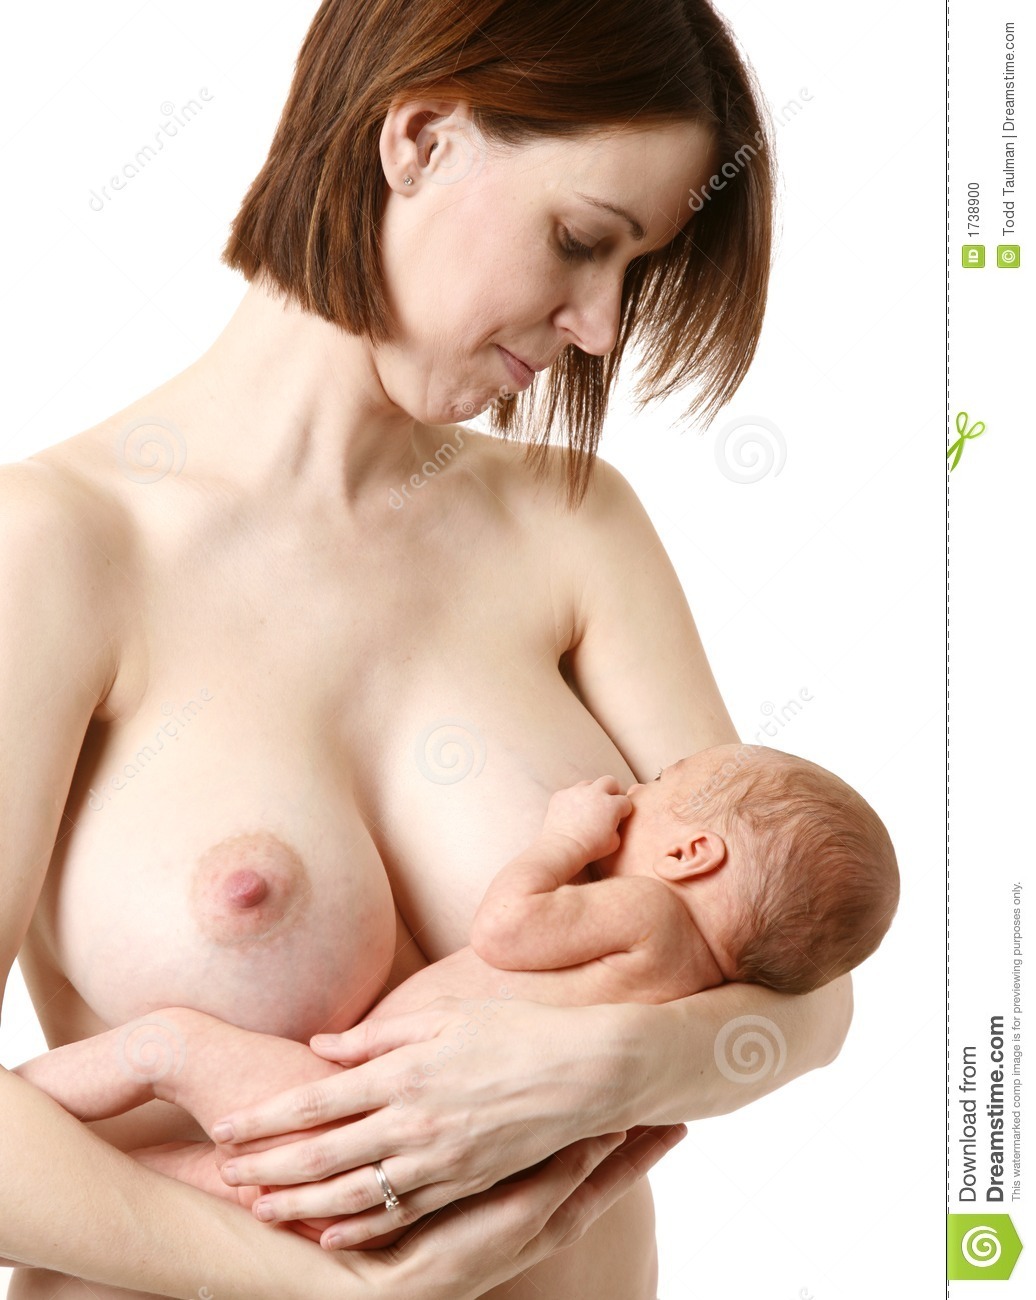 Son want to drink moms breast